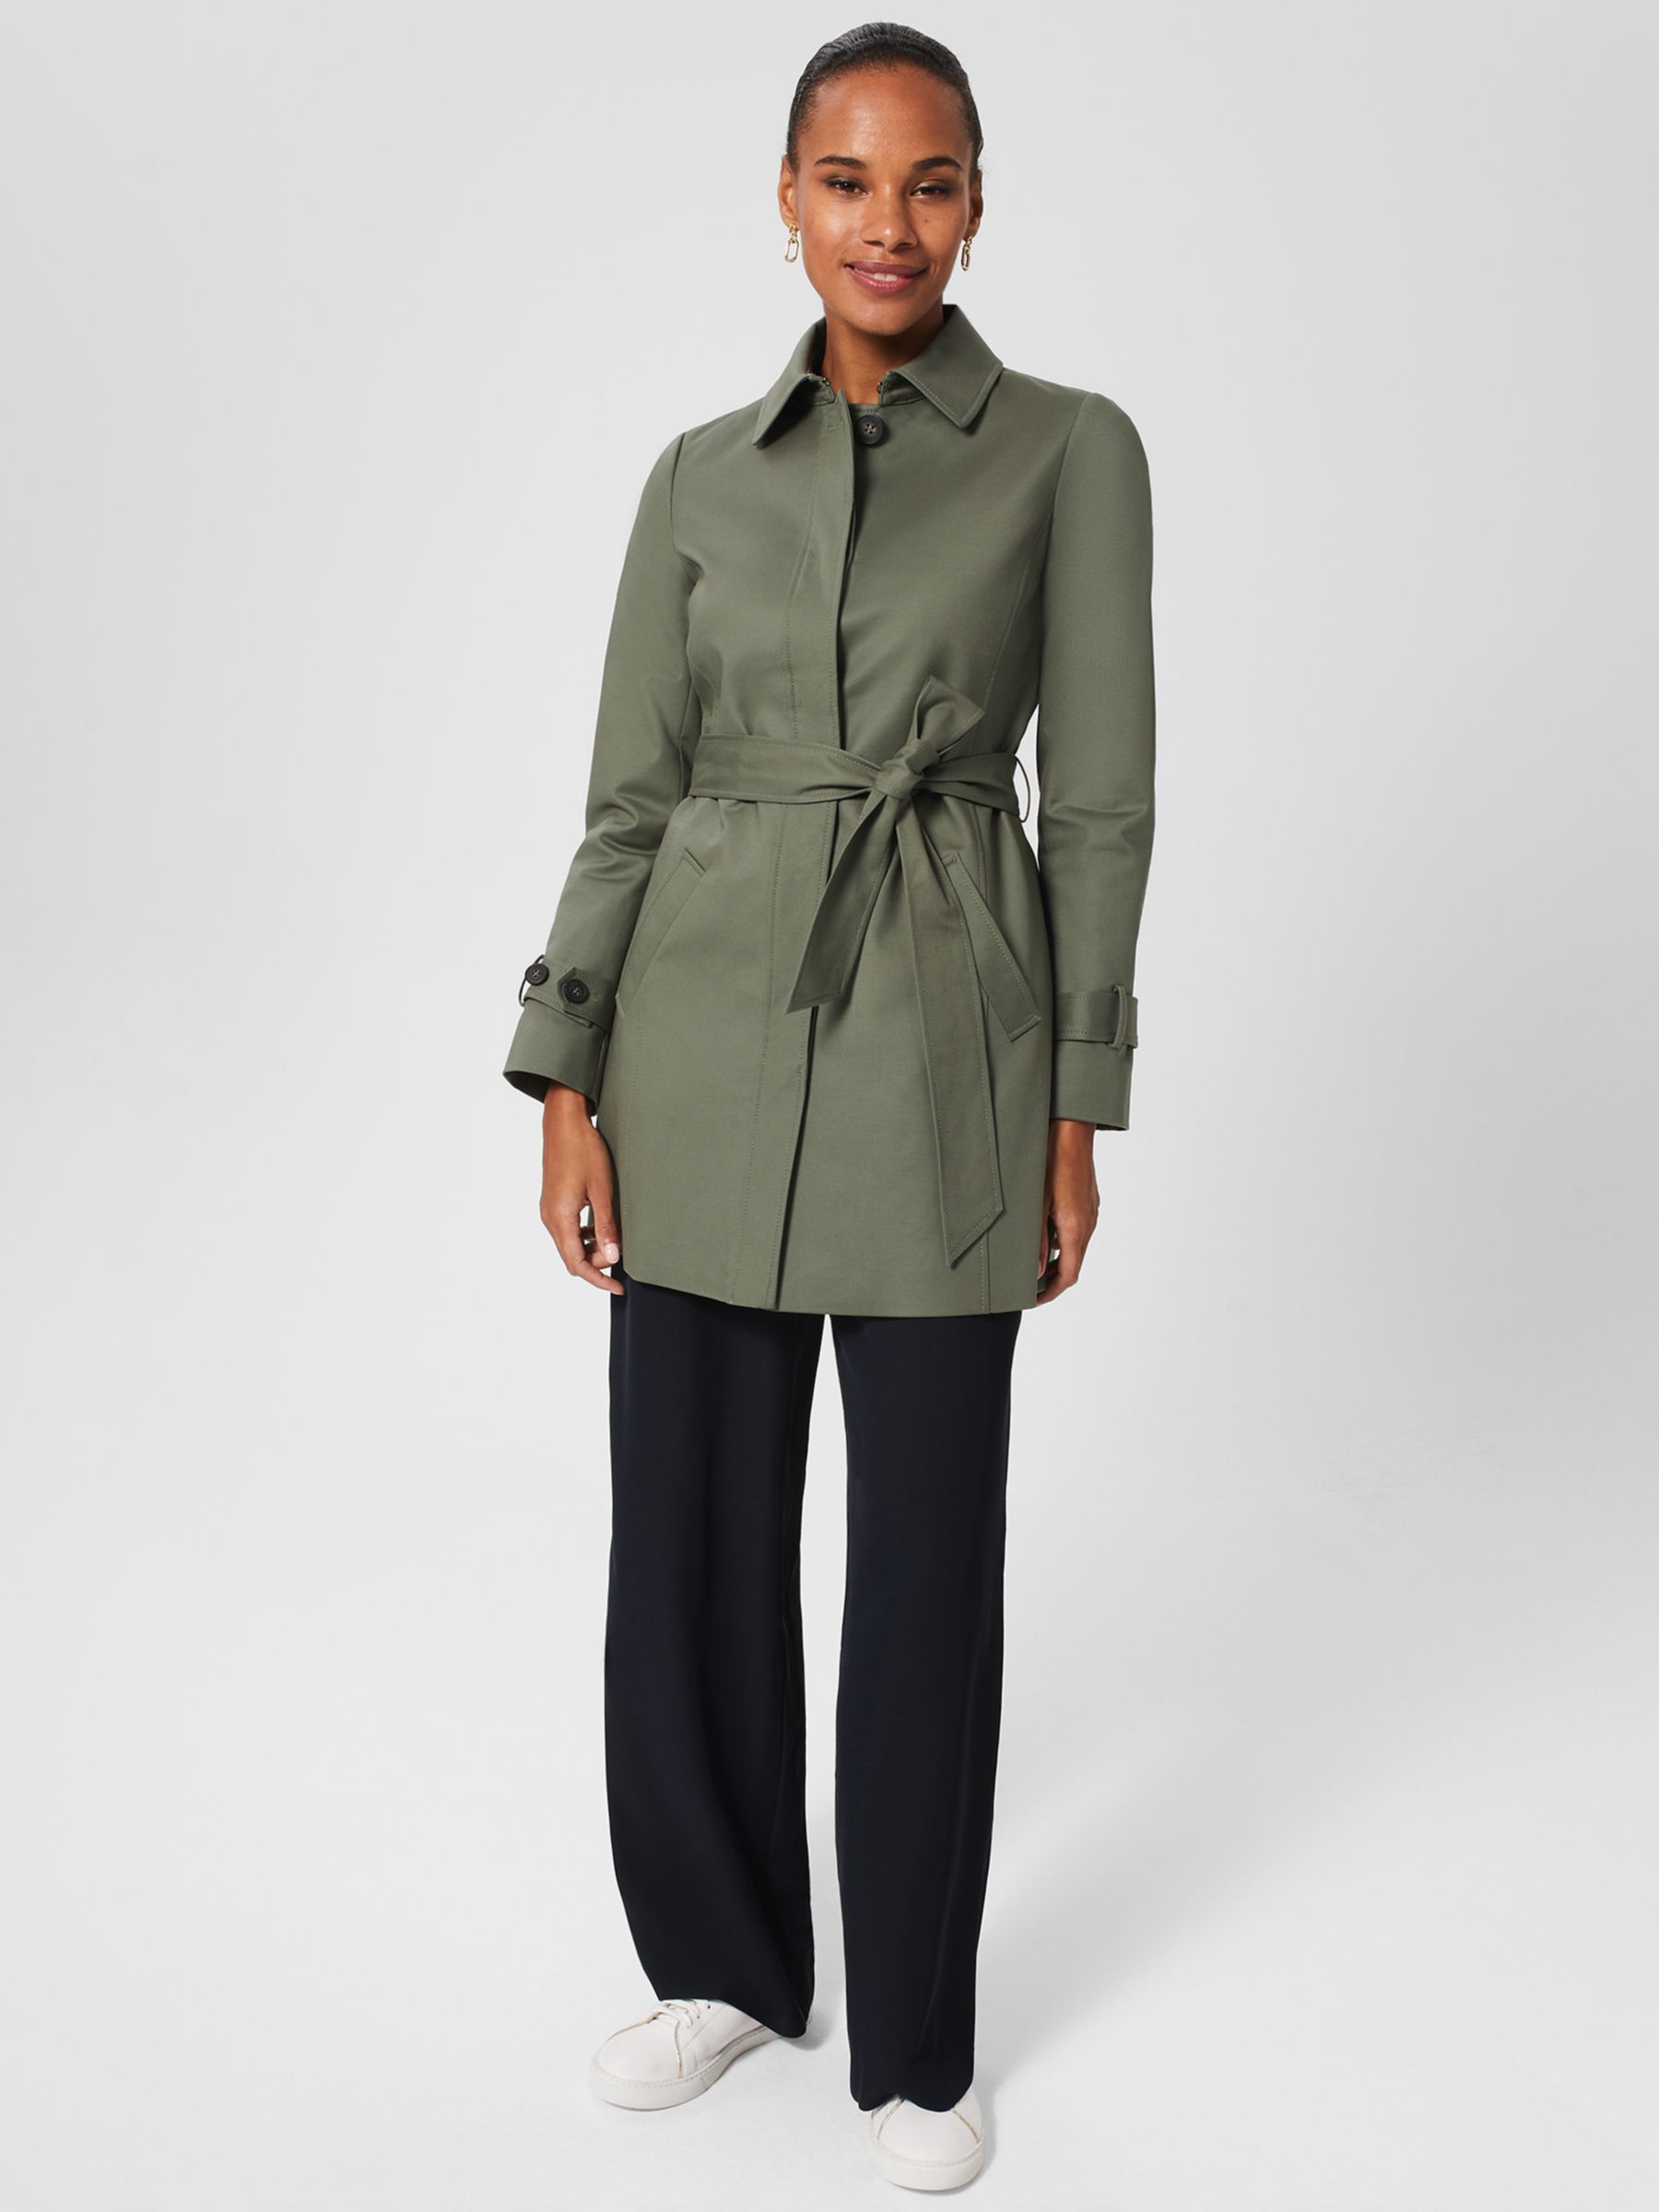 Hobbs Jane Trench Coat, Orchard Green at John Lewis & Partners